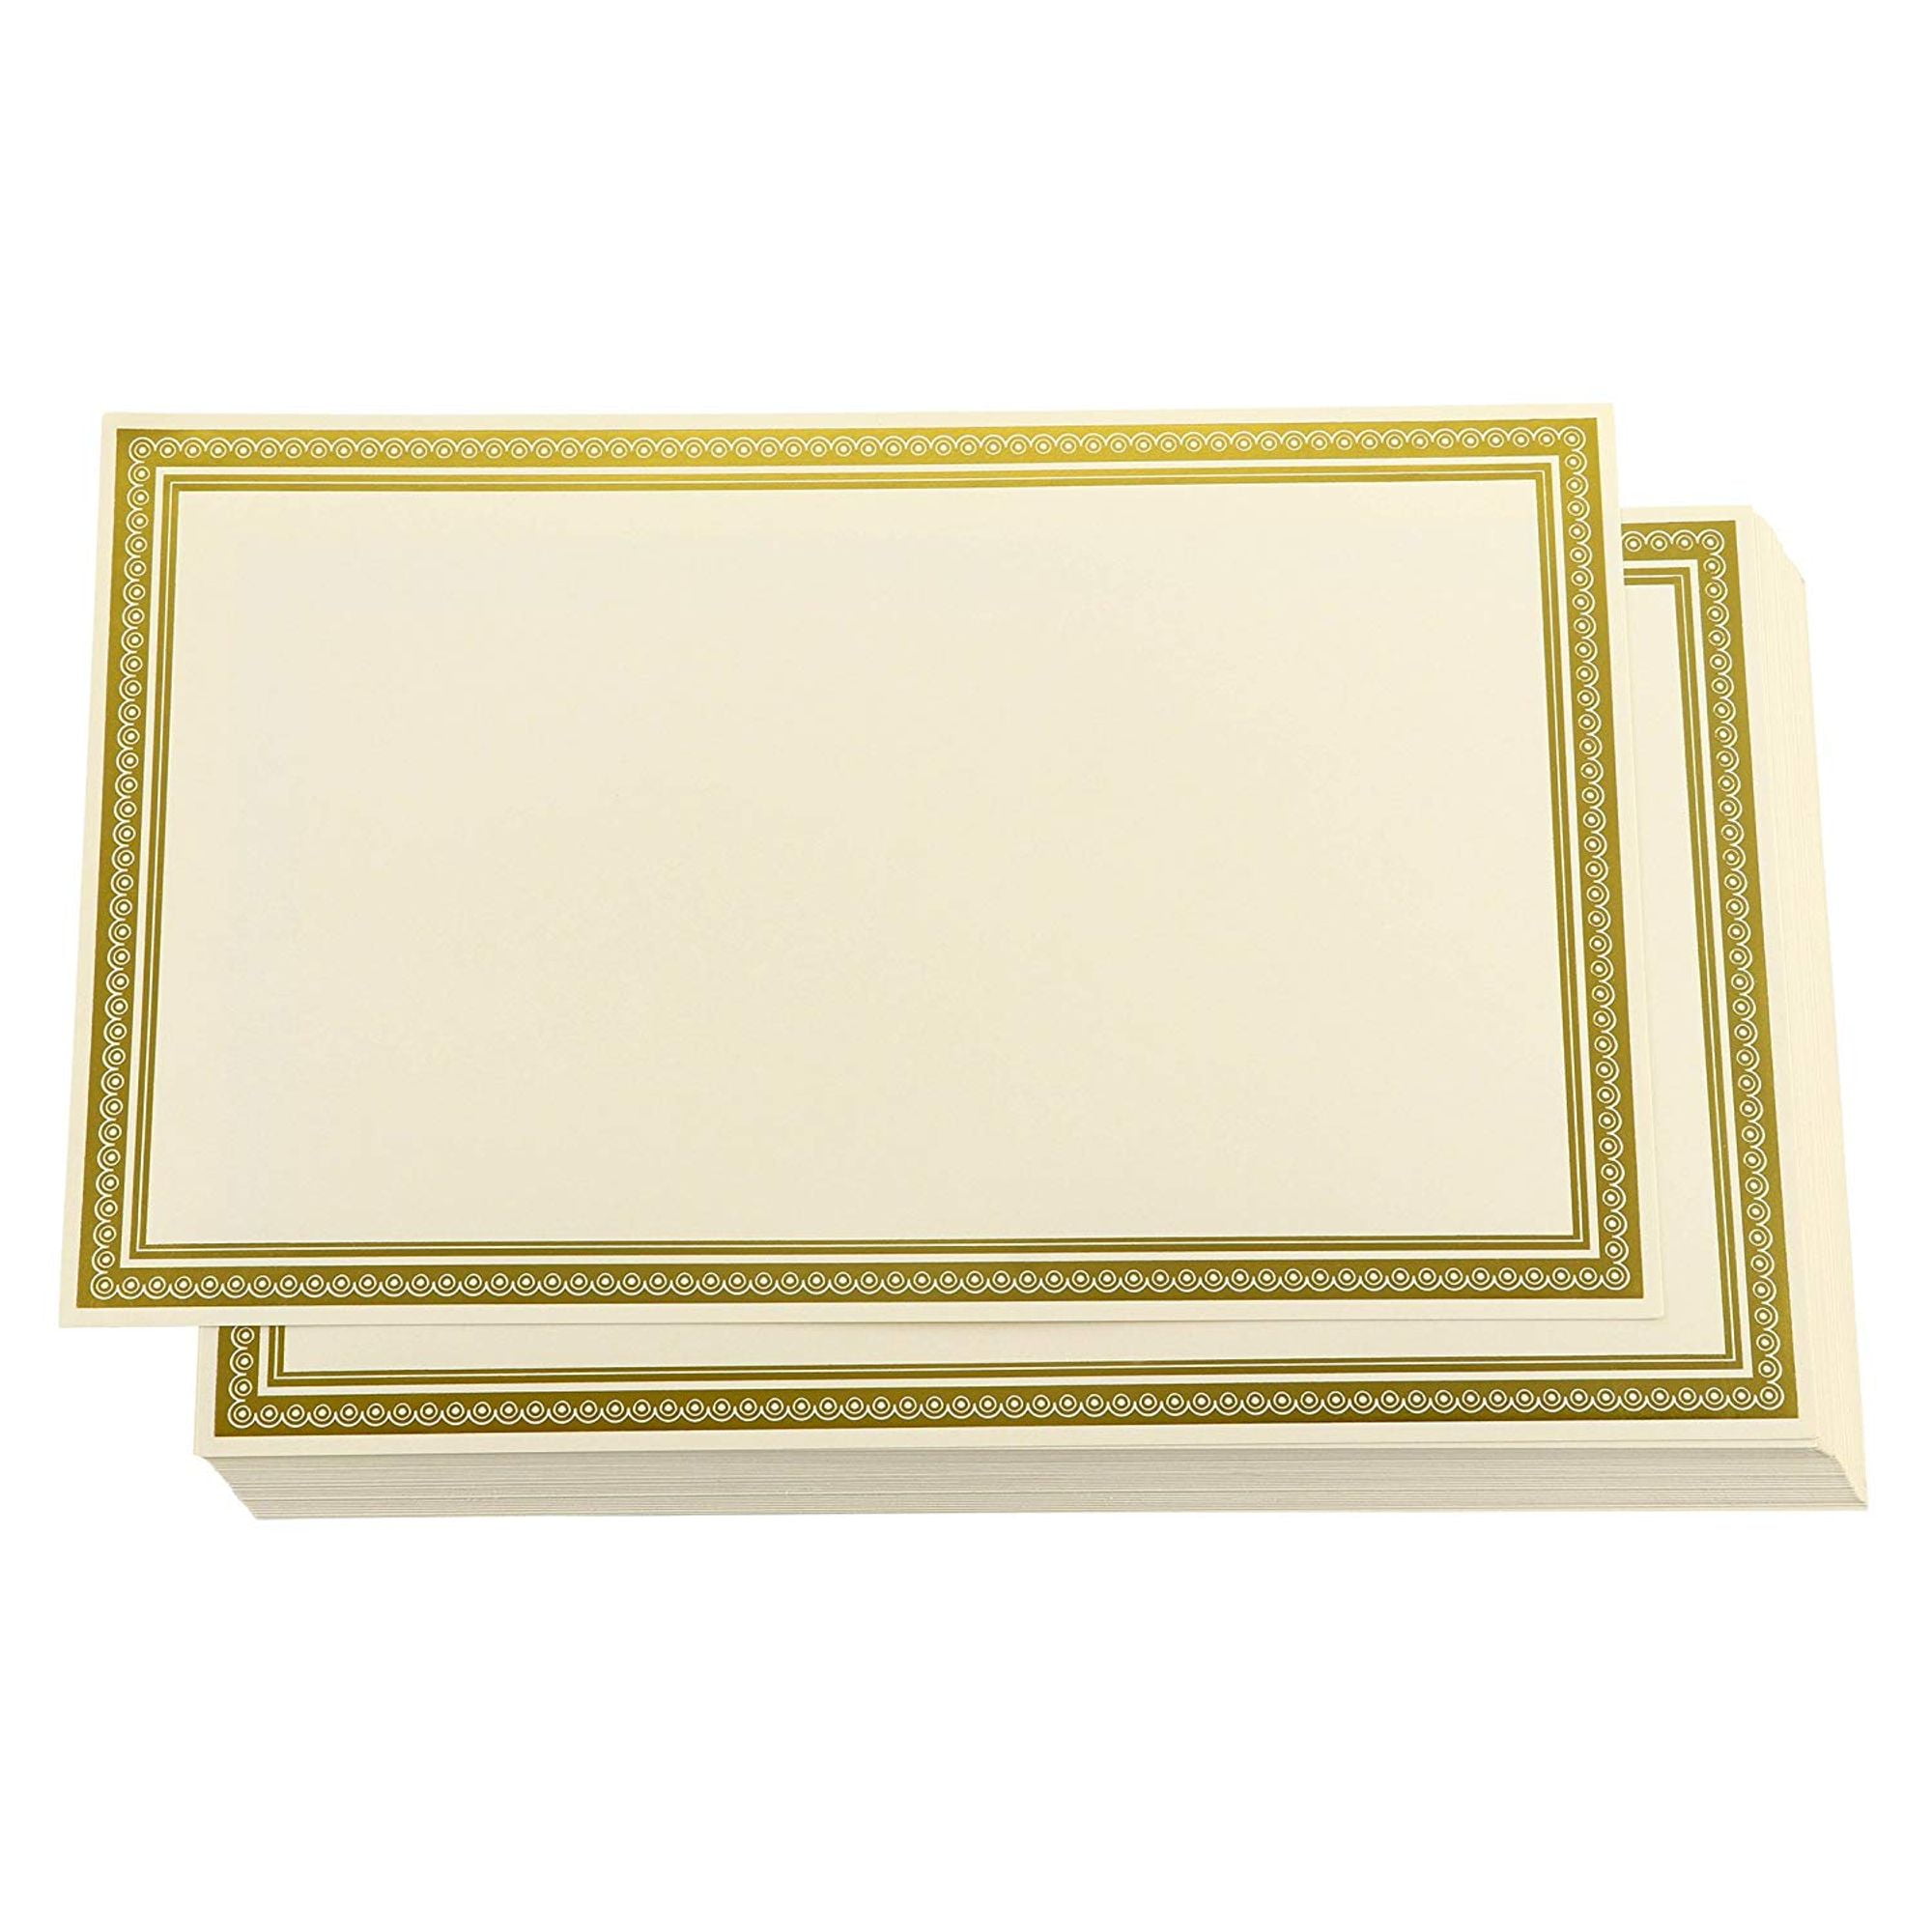 Award Certificates - 36-Pack Blank Plain Ivory Paper Sheets with Gold ...